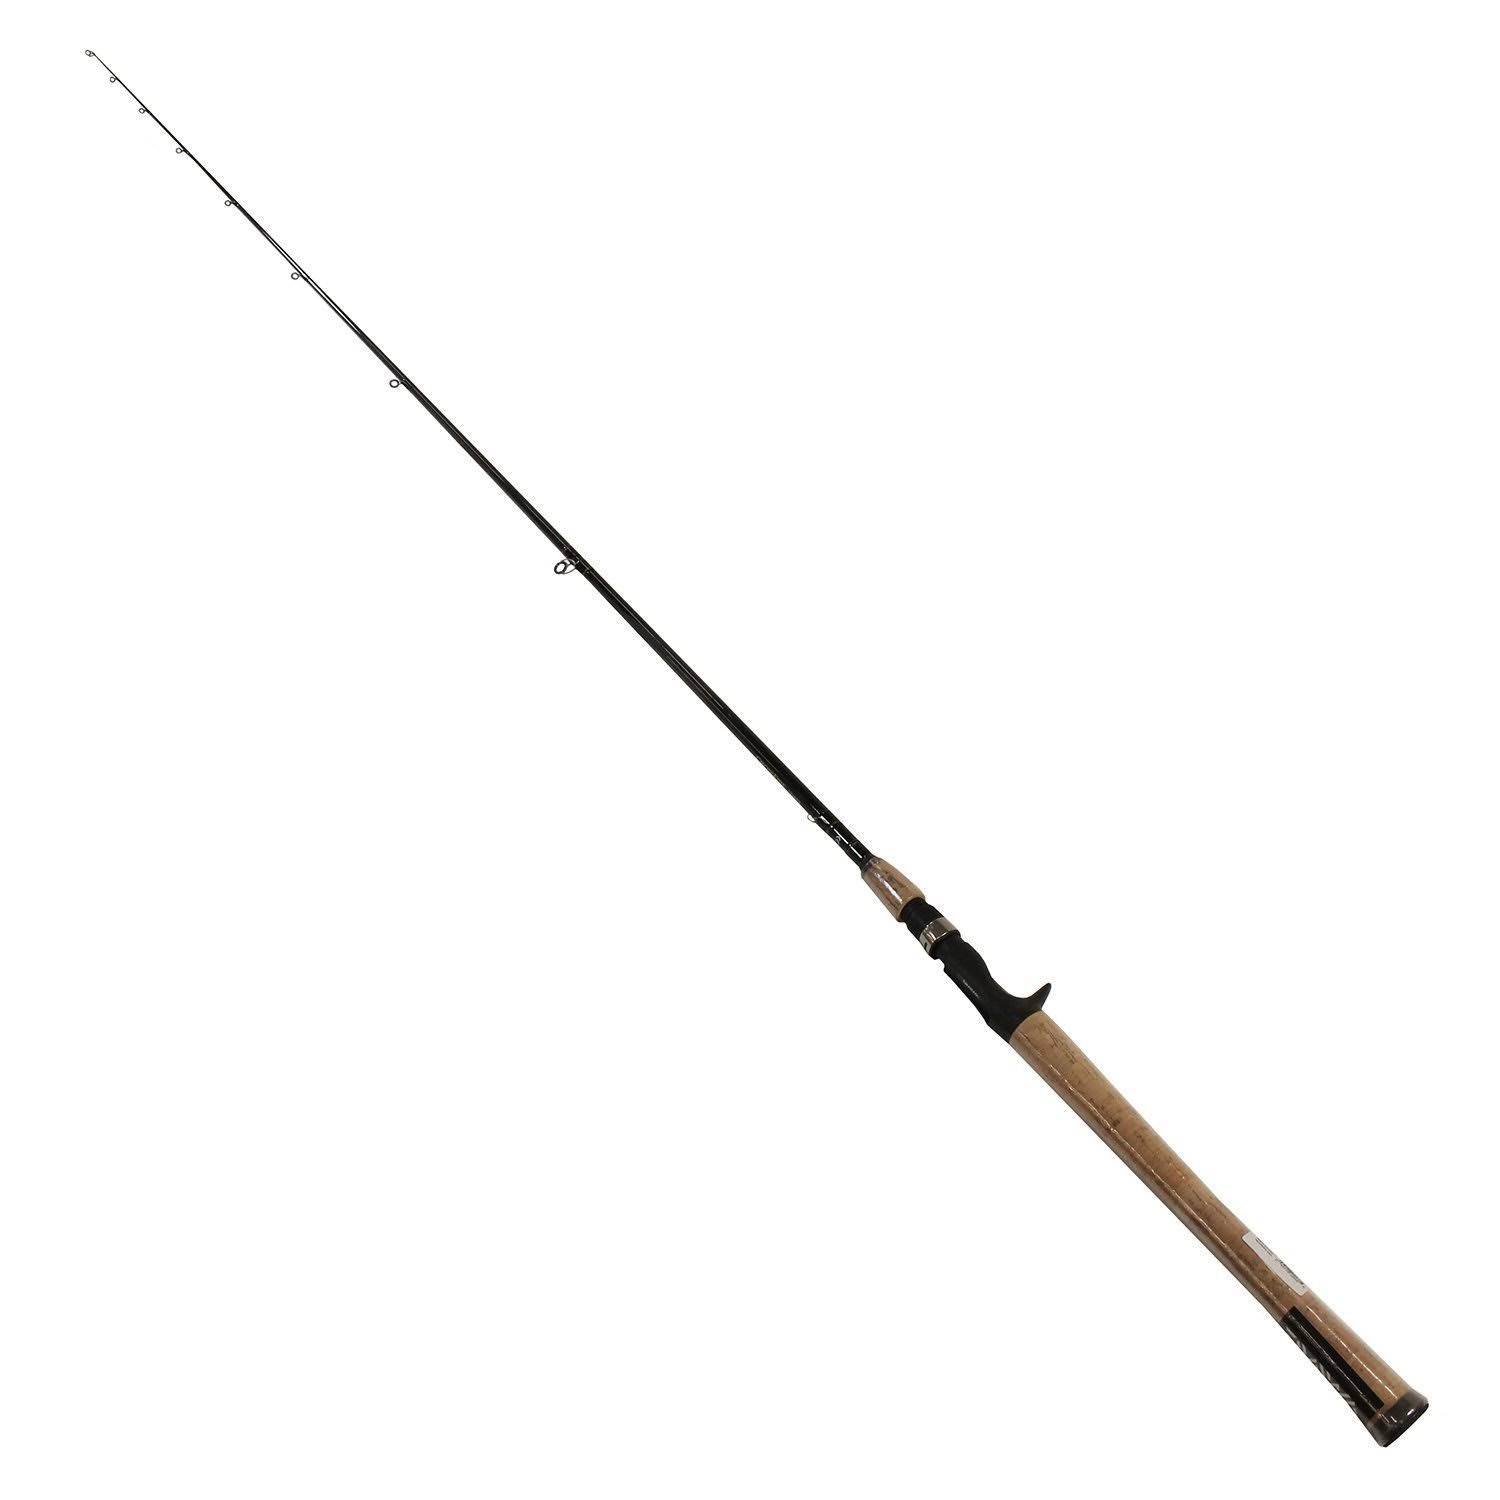 Crossfire Freshwater Casting Rod - 7'3" Length, 1pc, 10-20 lb Line Rate, 1/4-1 oz Lure Rate/ Medium/Heavy Power